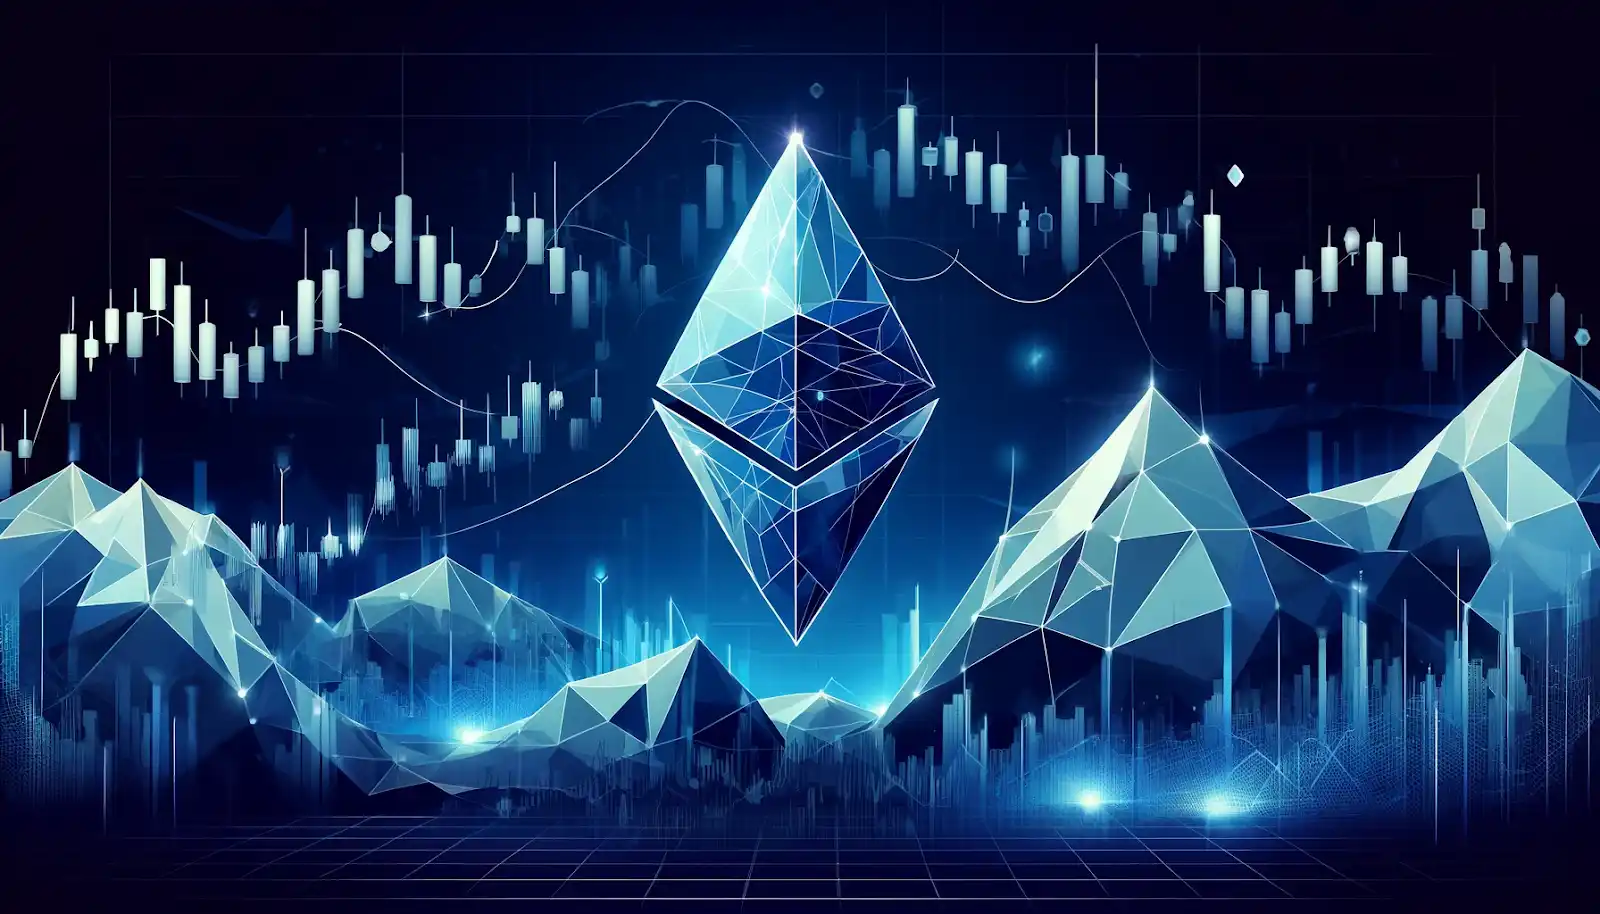 With blue background and trading candlesticks, Ethereum symbol representing frequent price changes